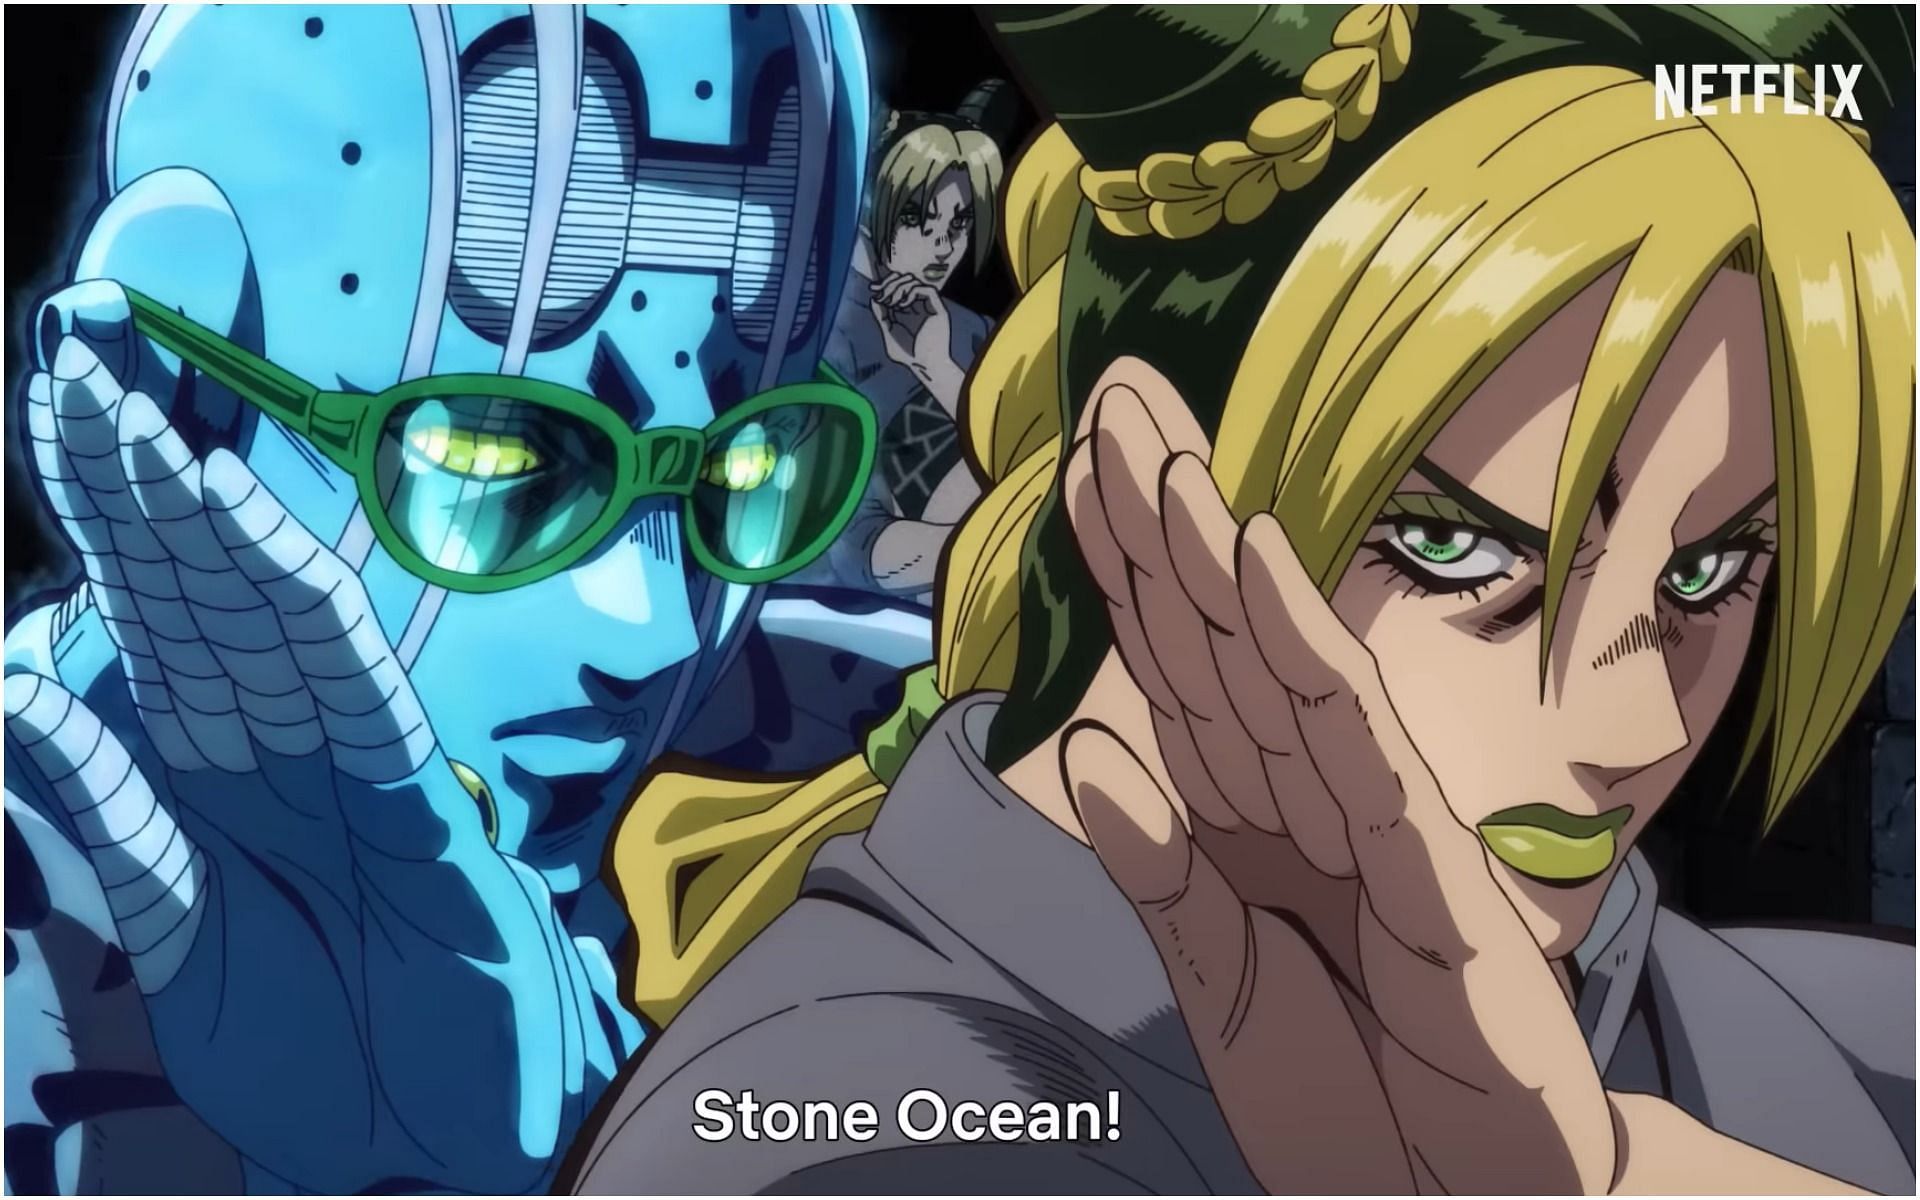 New trailer and key visual for Stone Ocean revealed in Anime Japan (Image via Netflix)